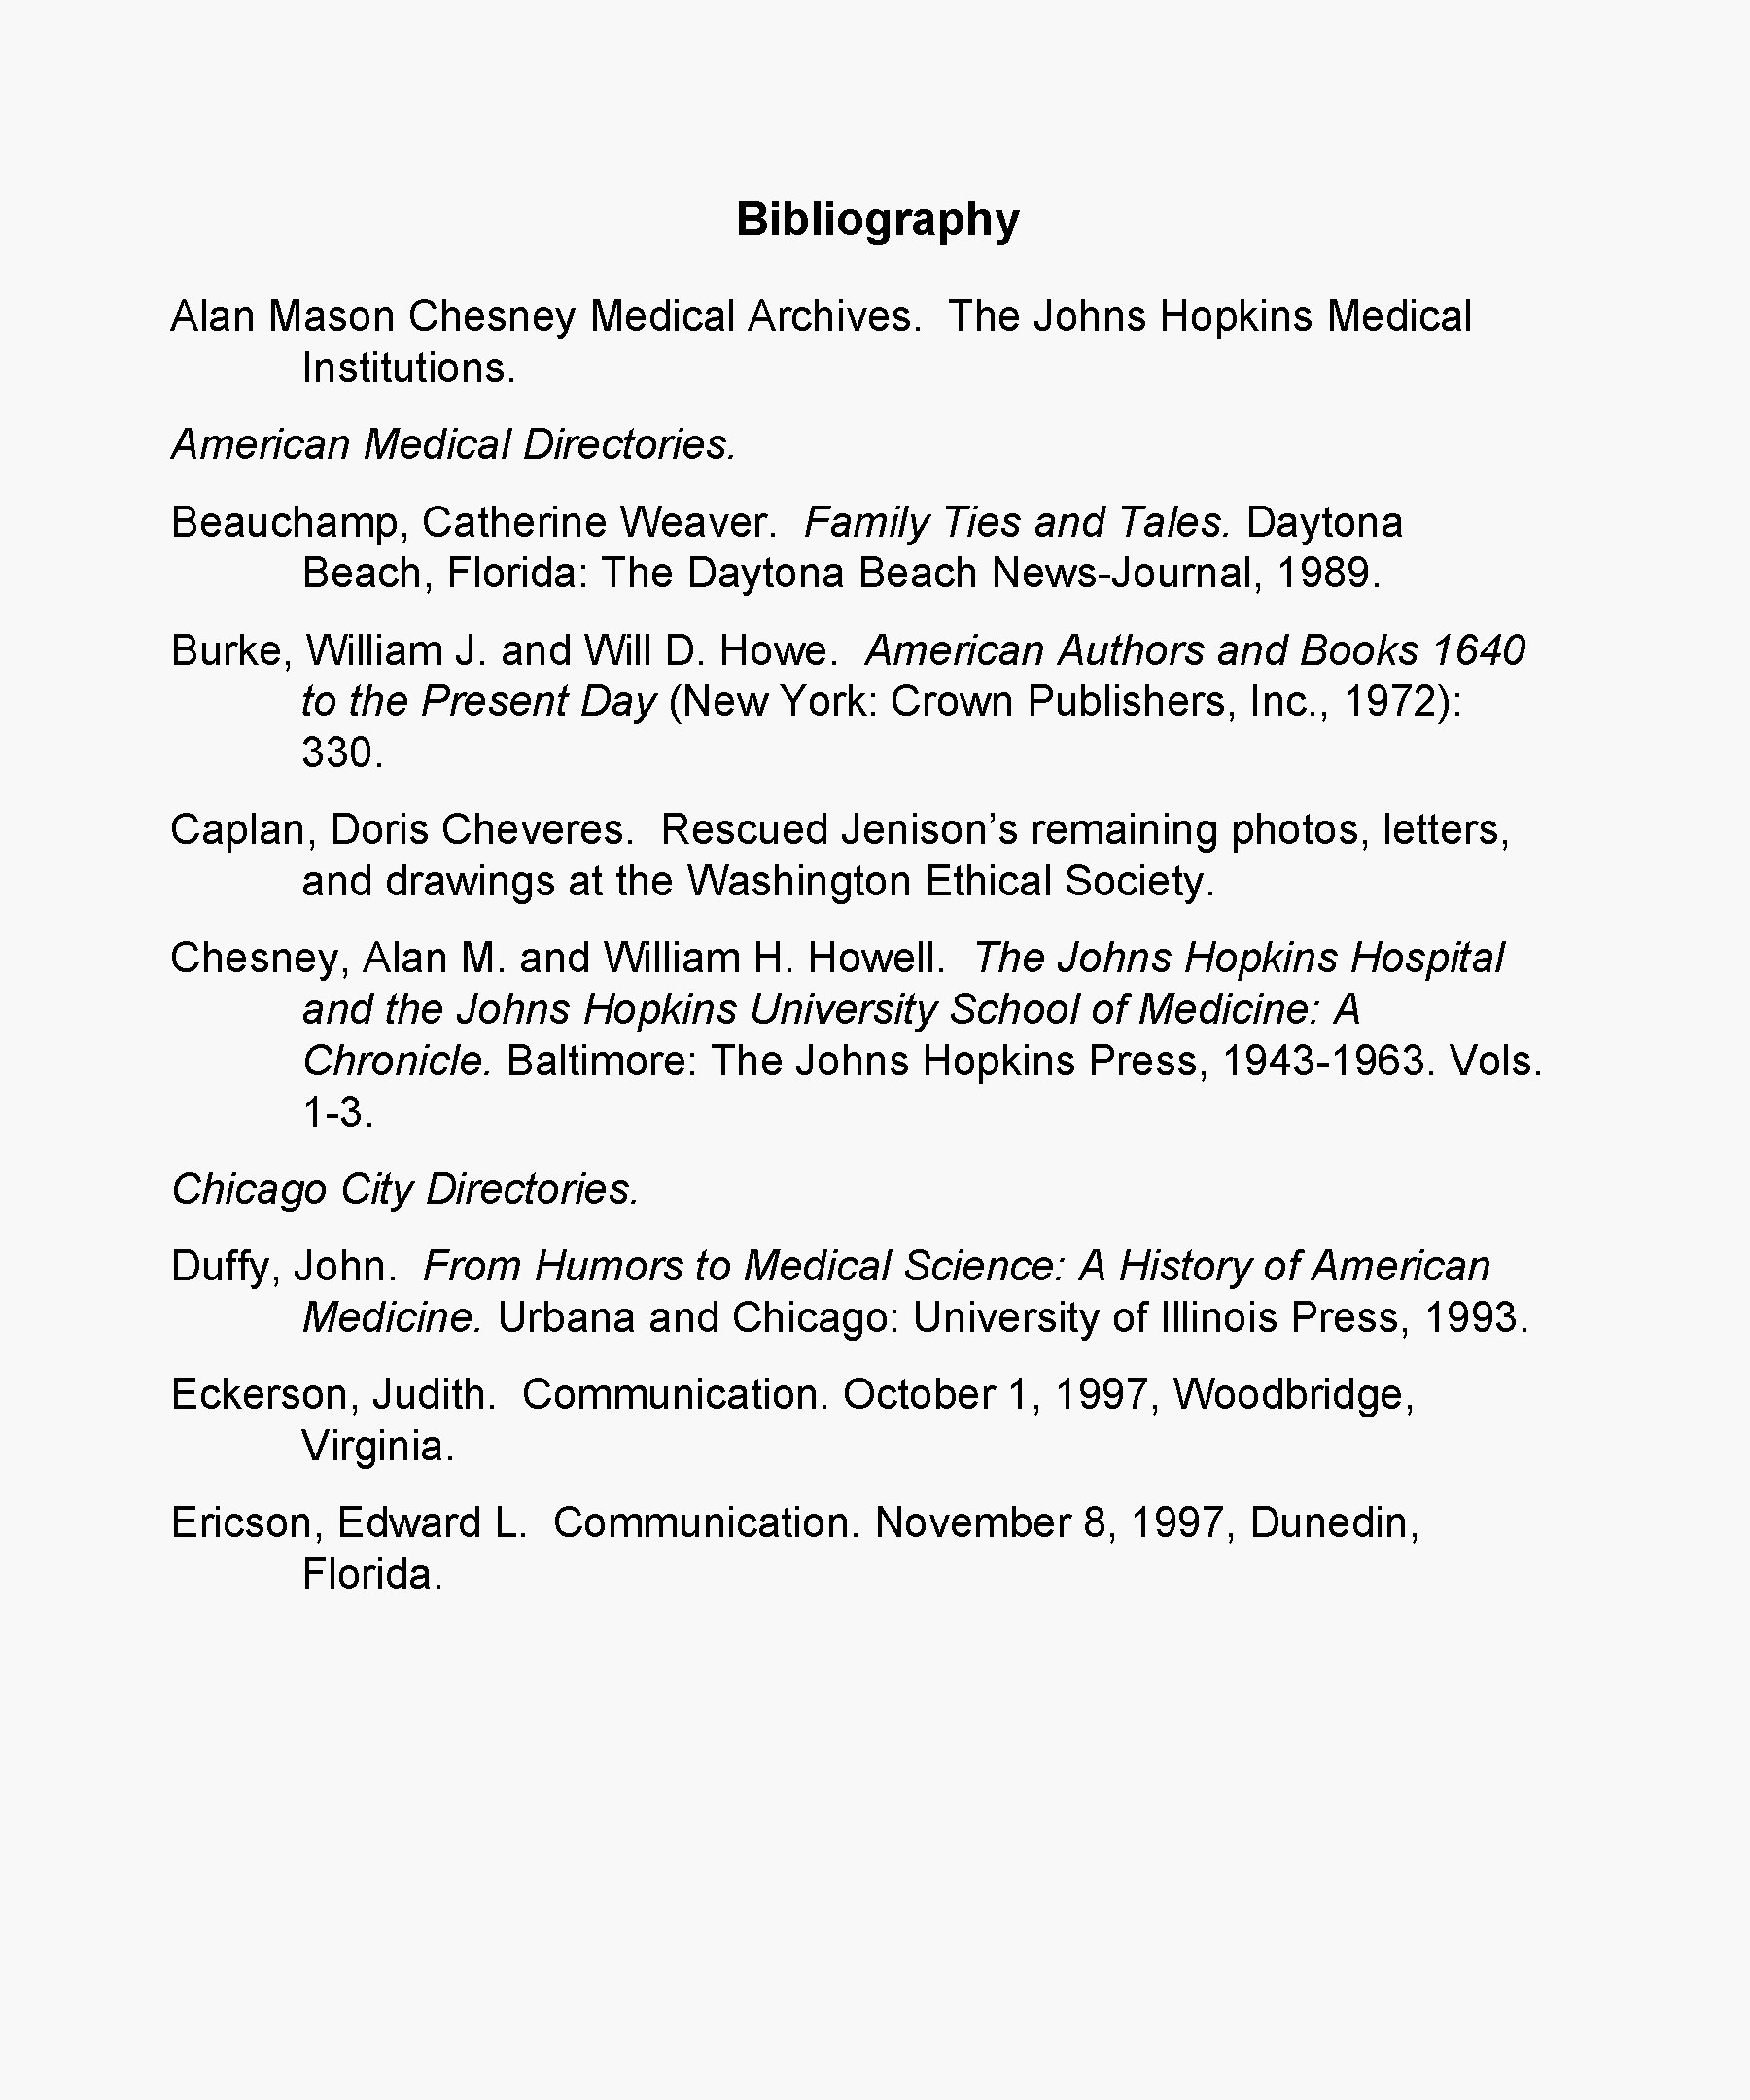 Bibliography Alan Mason Chesney Medical Archives. The Johns Hopkins Medical Institutions. American Medical Directories.